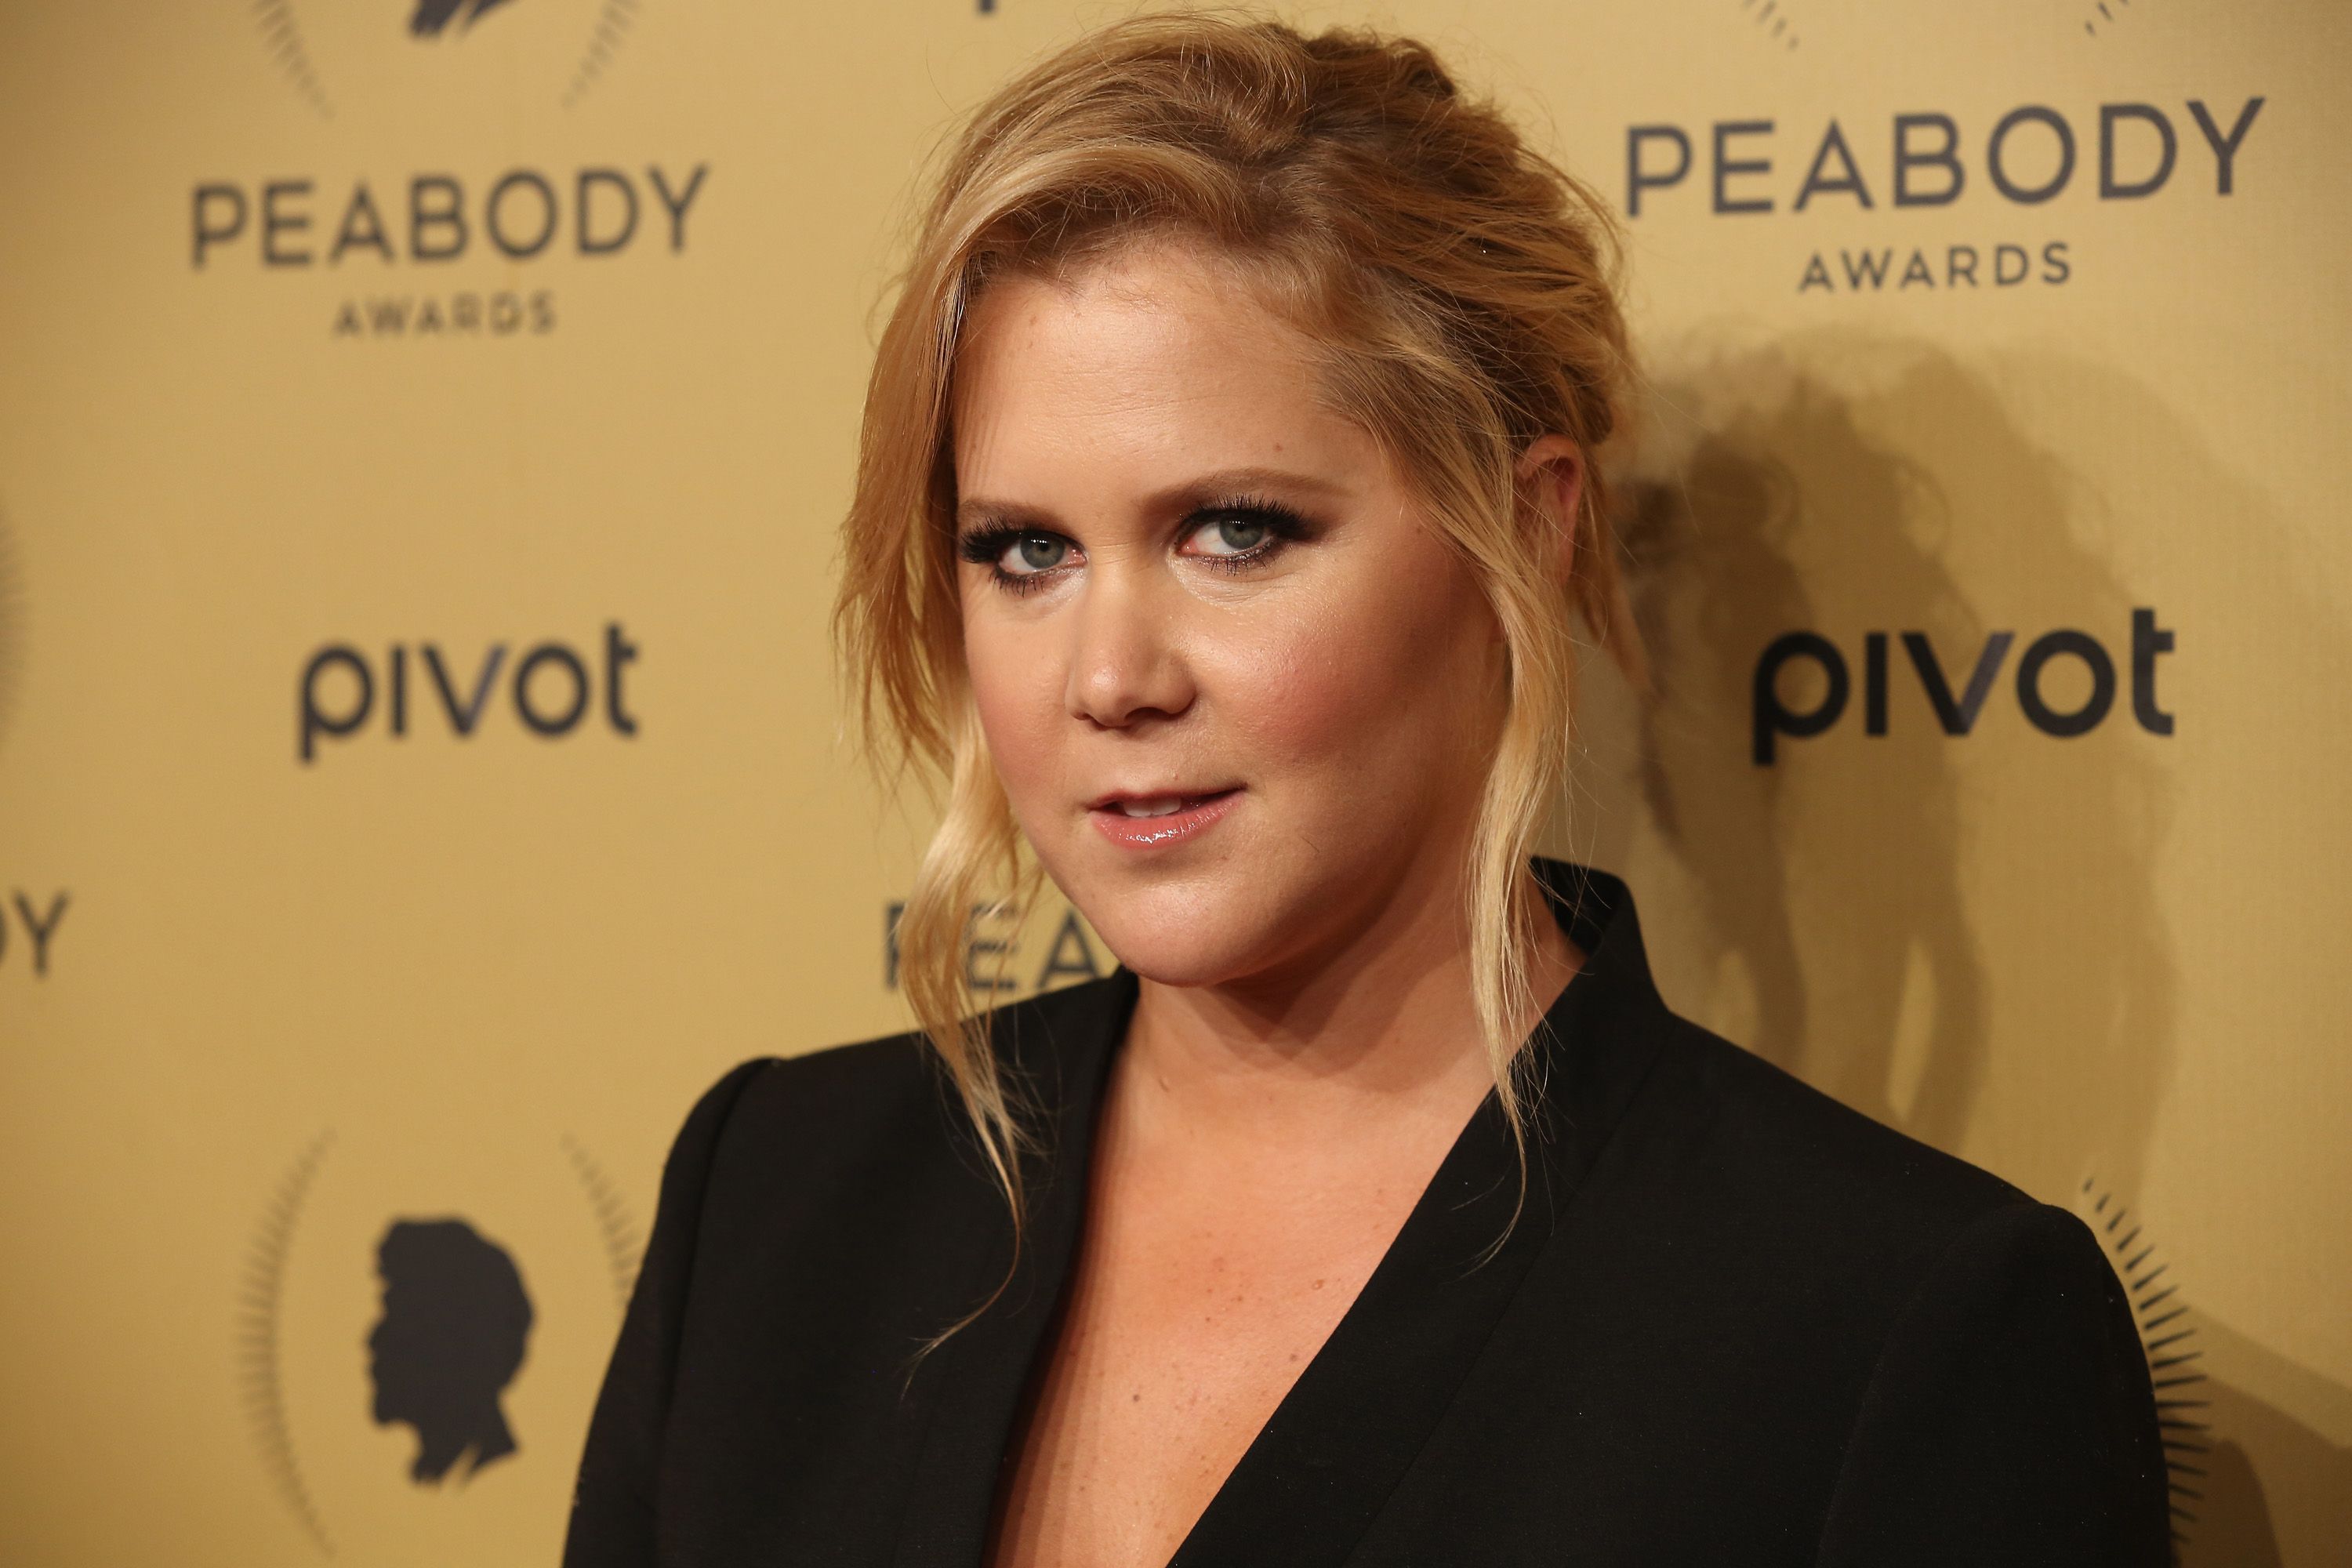  Amy Schumer at The 74th Annual Peabody Awards Ceremony at Cipriani Wall Street on May 31, 2015 in New York City | Photo: Getty Images